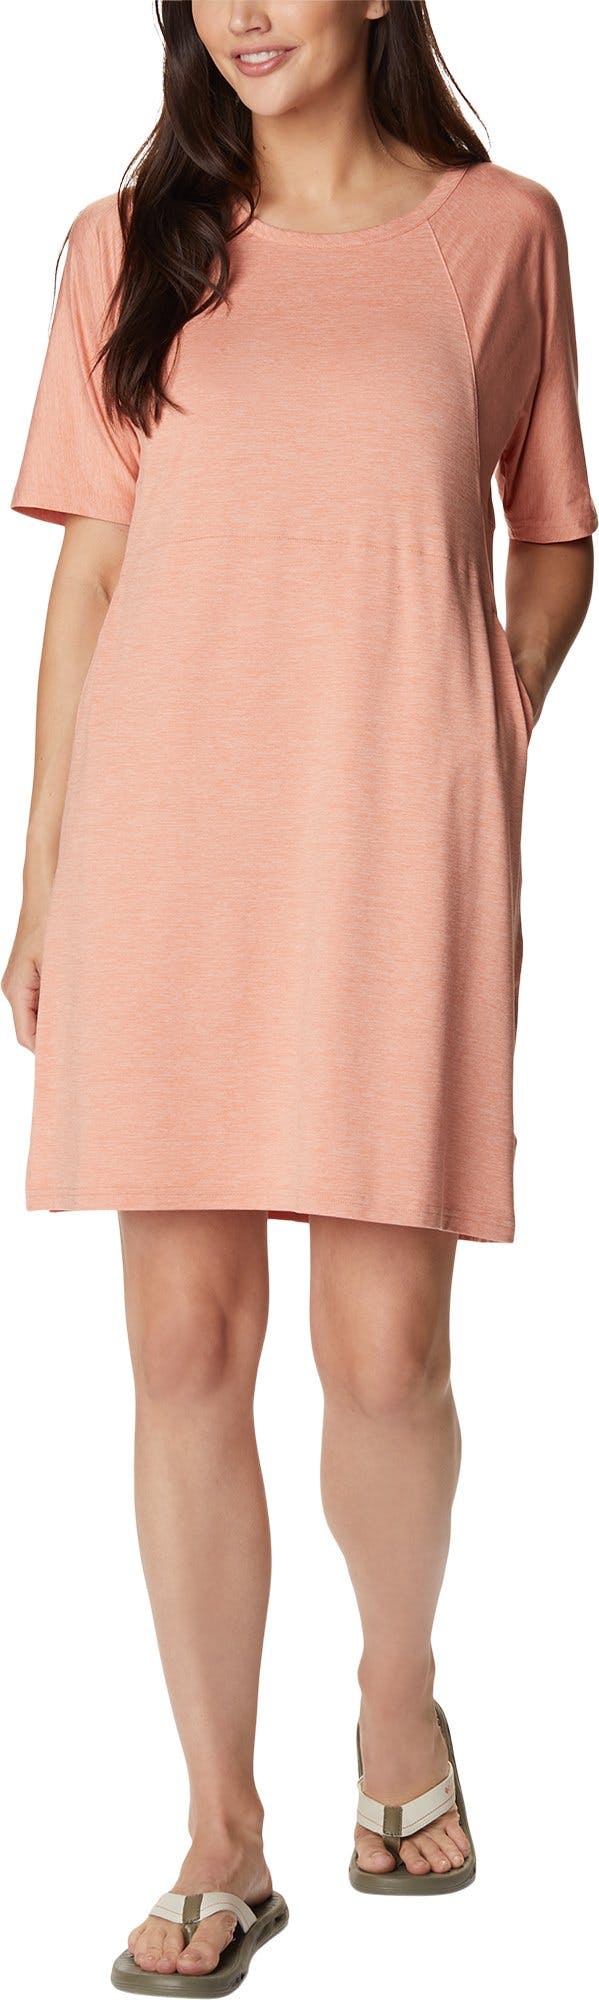 Product image for Coral Ridge™ Dress - Women's